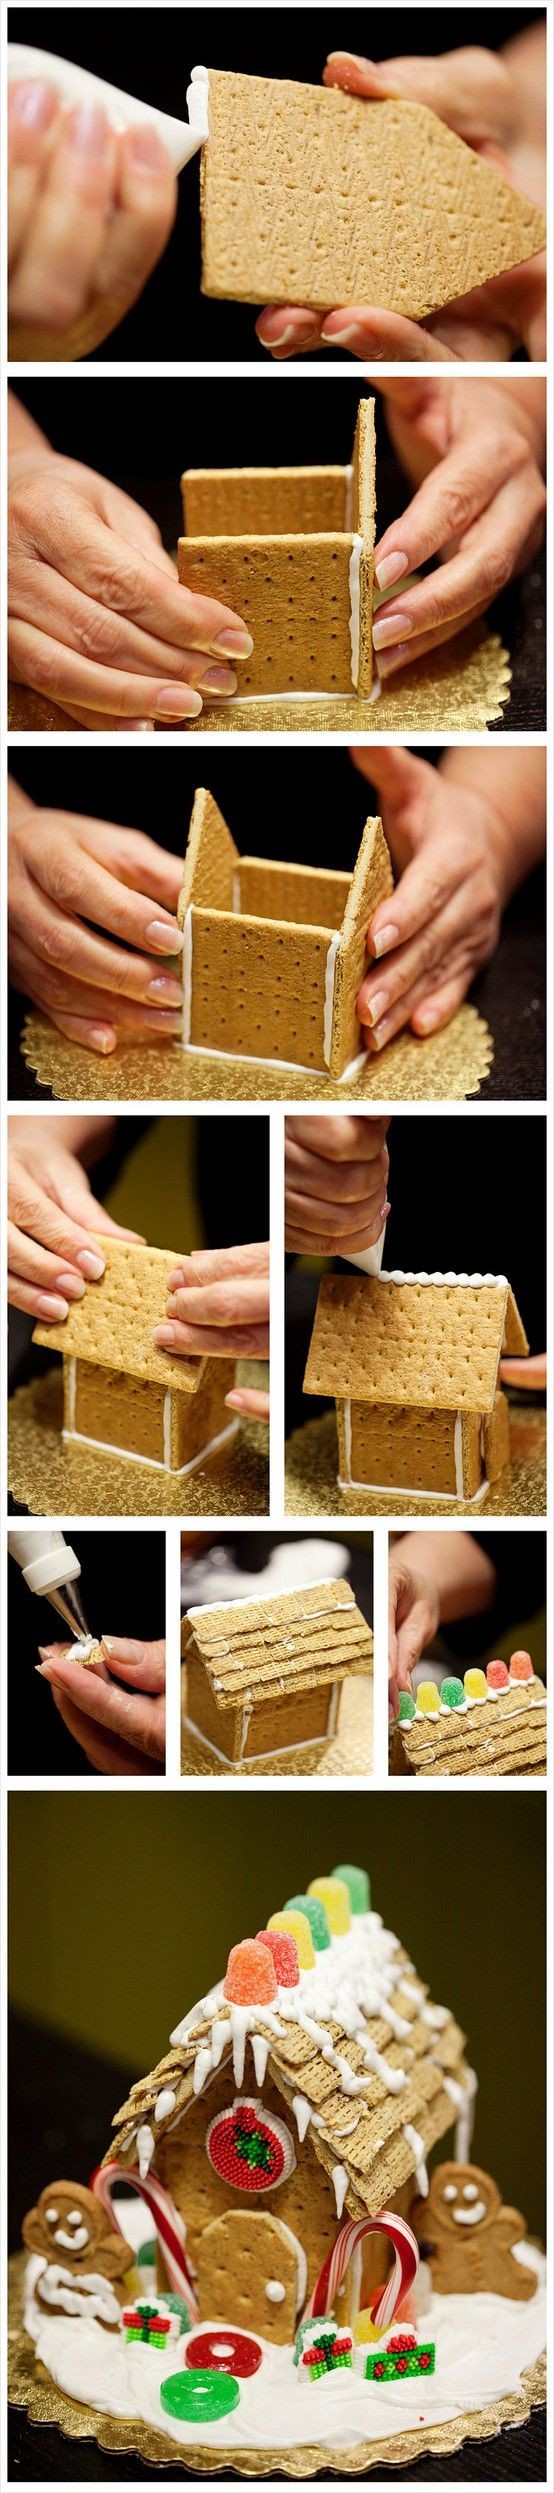 Mini Gingerbread Houses made out of Graham Cracker...